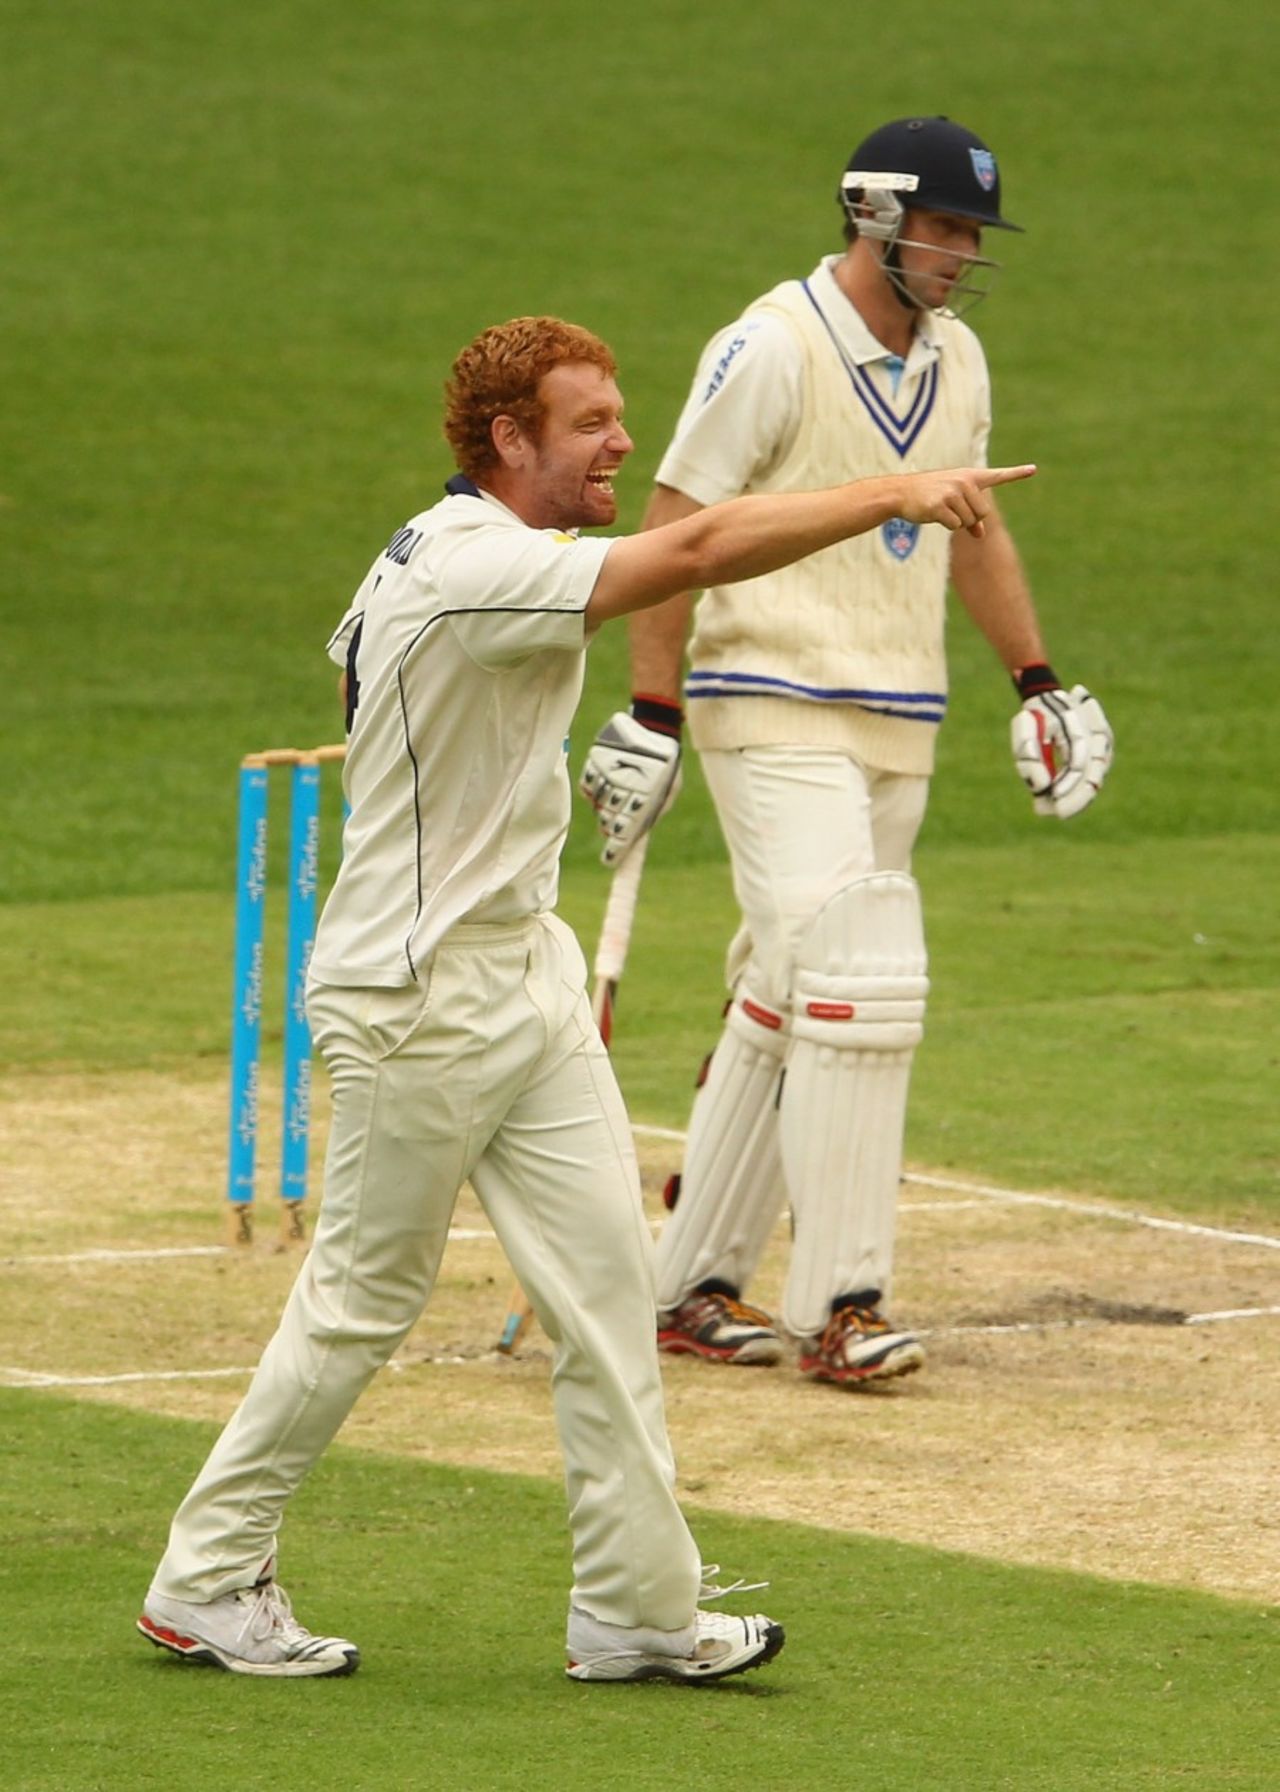 Andrew McDonald celebrates a wicket, Victoria v New South Wales, Sheffield Shield, Melbourne, 1st day, March 8, 2012